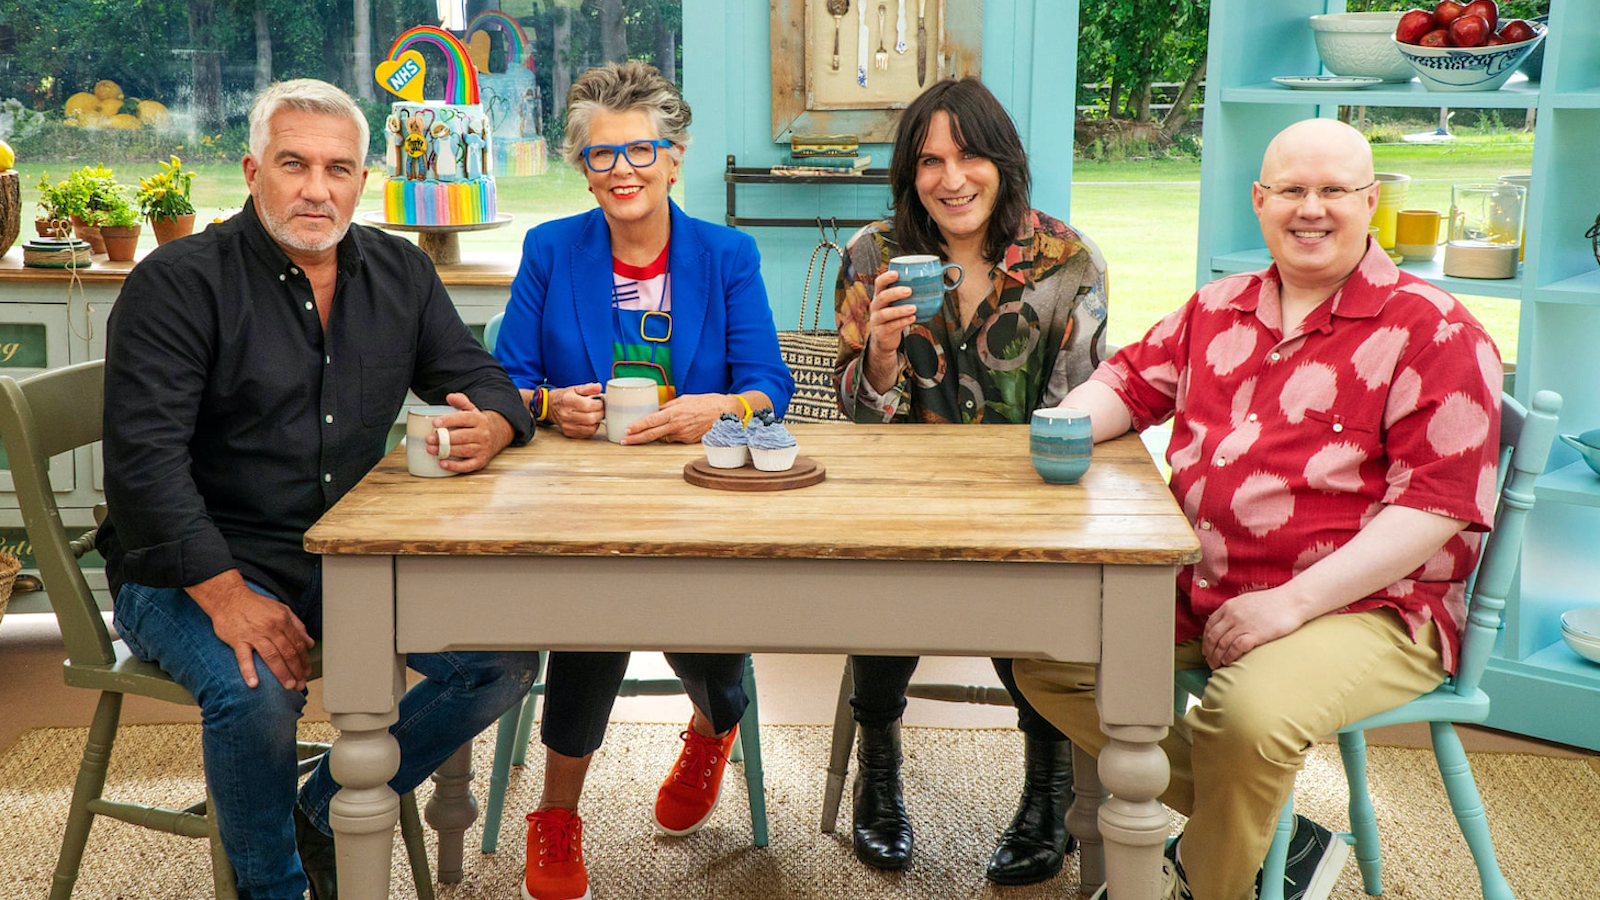 Seated at a table from left to right, Paul Hollywood, Prue Leith, Noel Fielding and Matt Lucas from 'The Great British Baking Show'